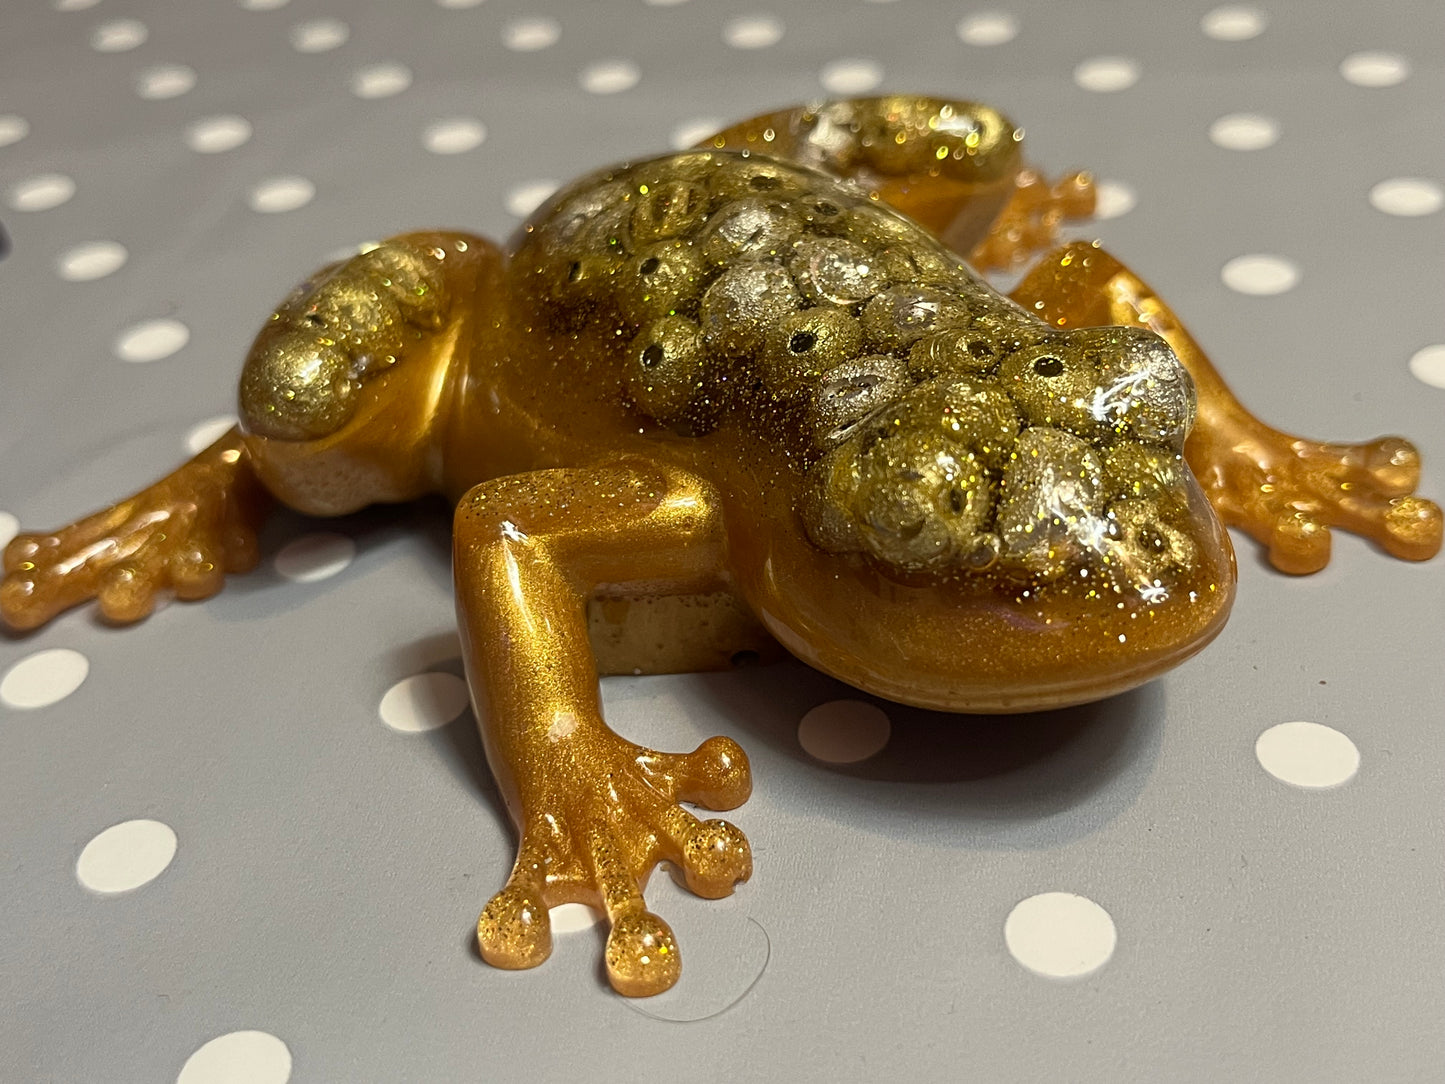 Midas Frog - From the Limited Edition hand made Big Weird Frog range